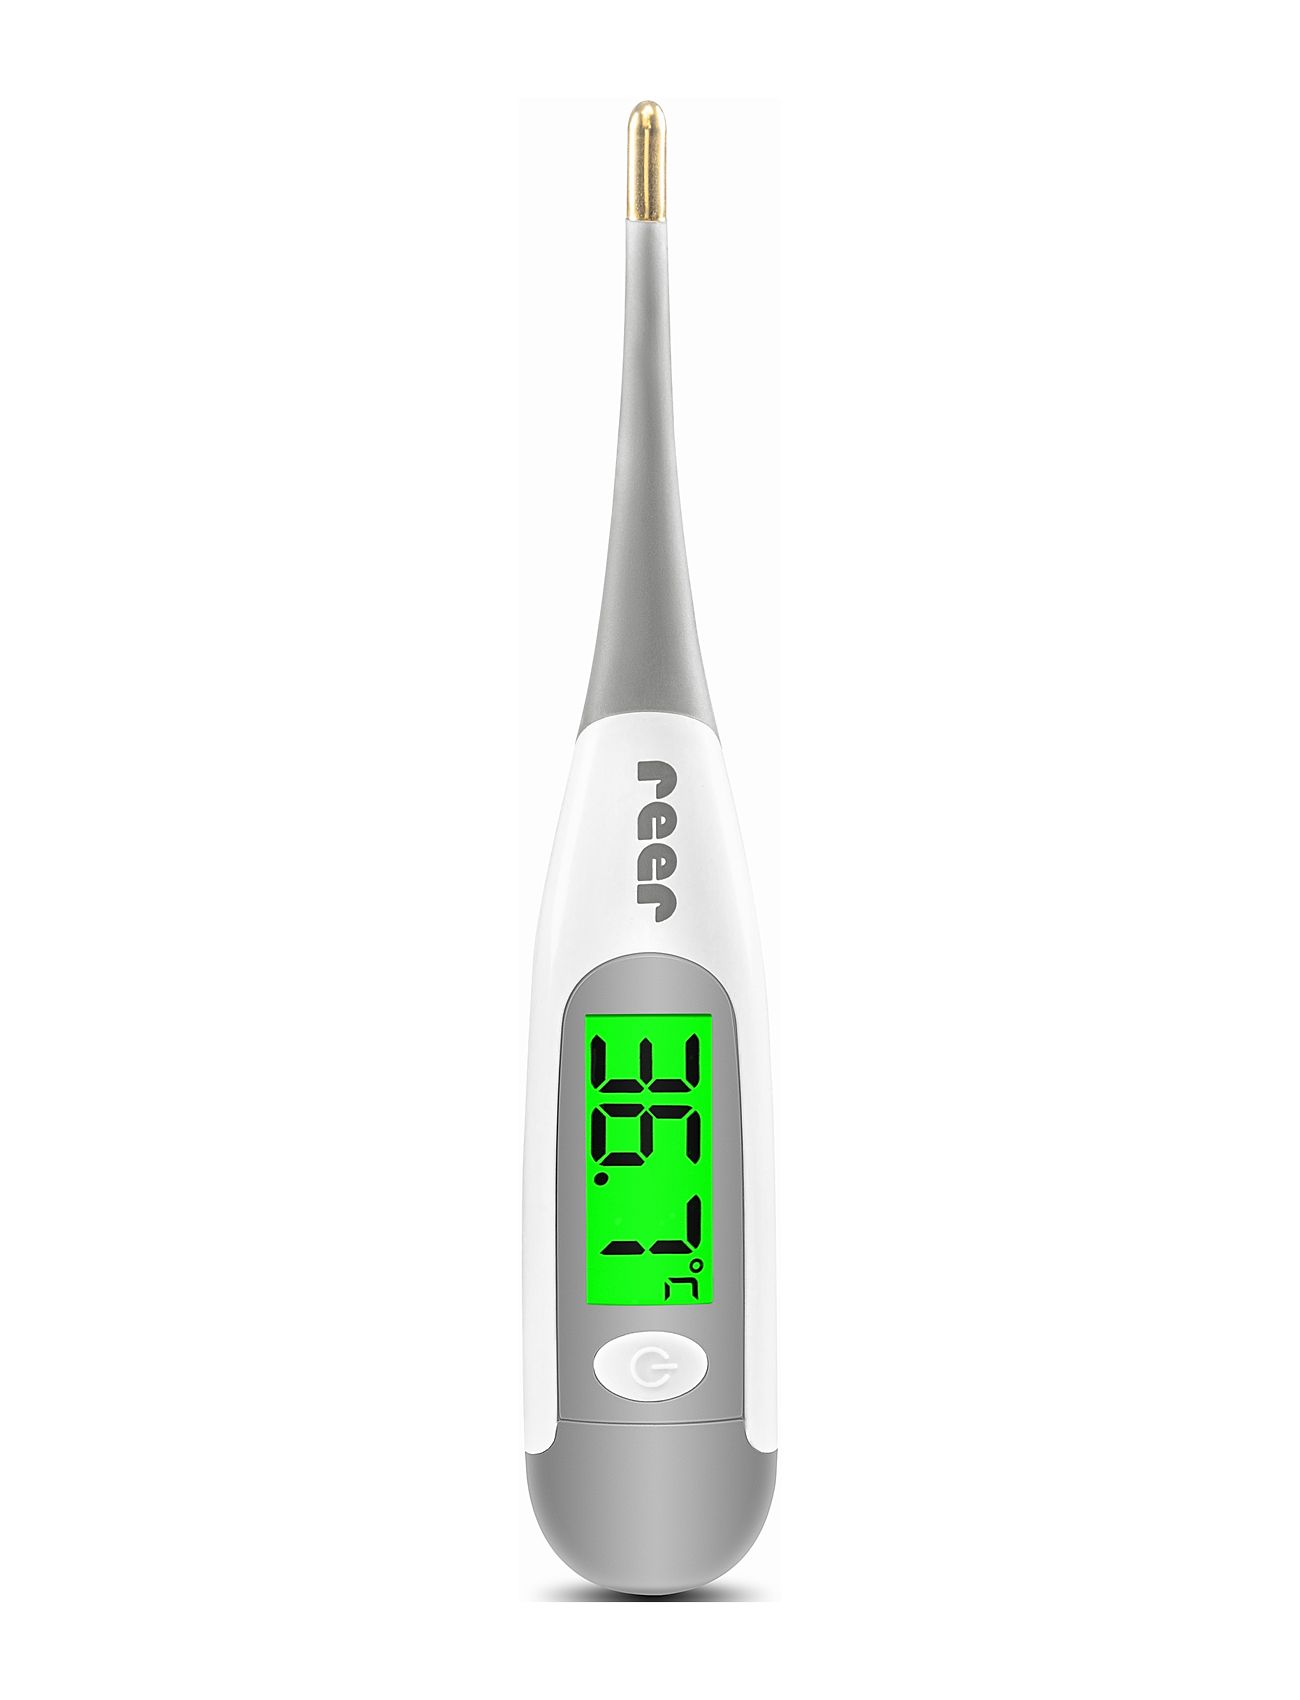 Reer "Expresstemp Pro, Digital Express-Thermometer Baby & Maternity Care Hygiene White Reer"